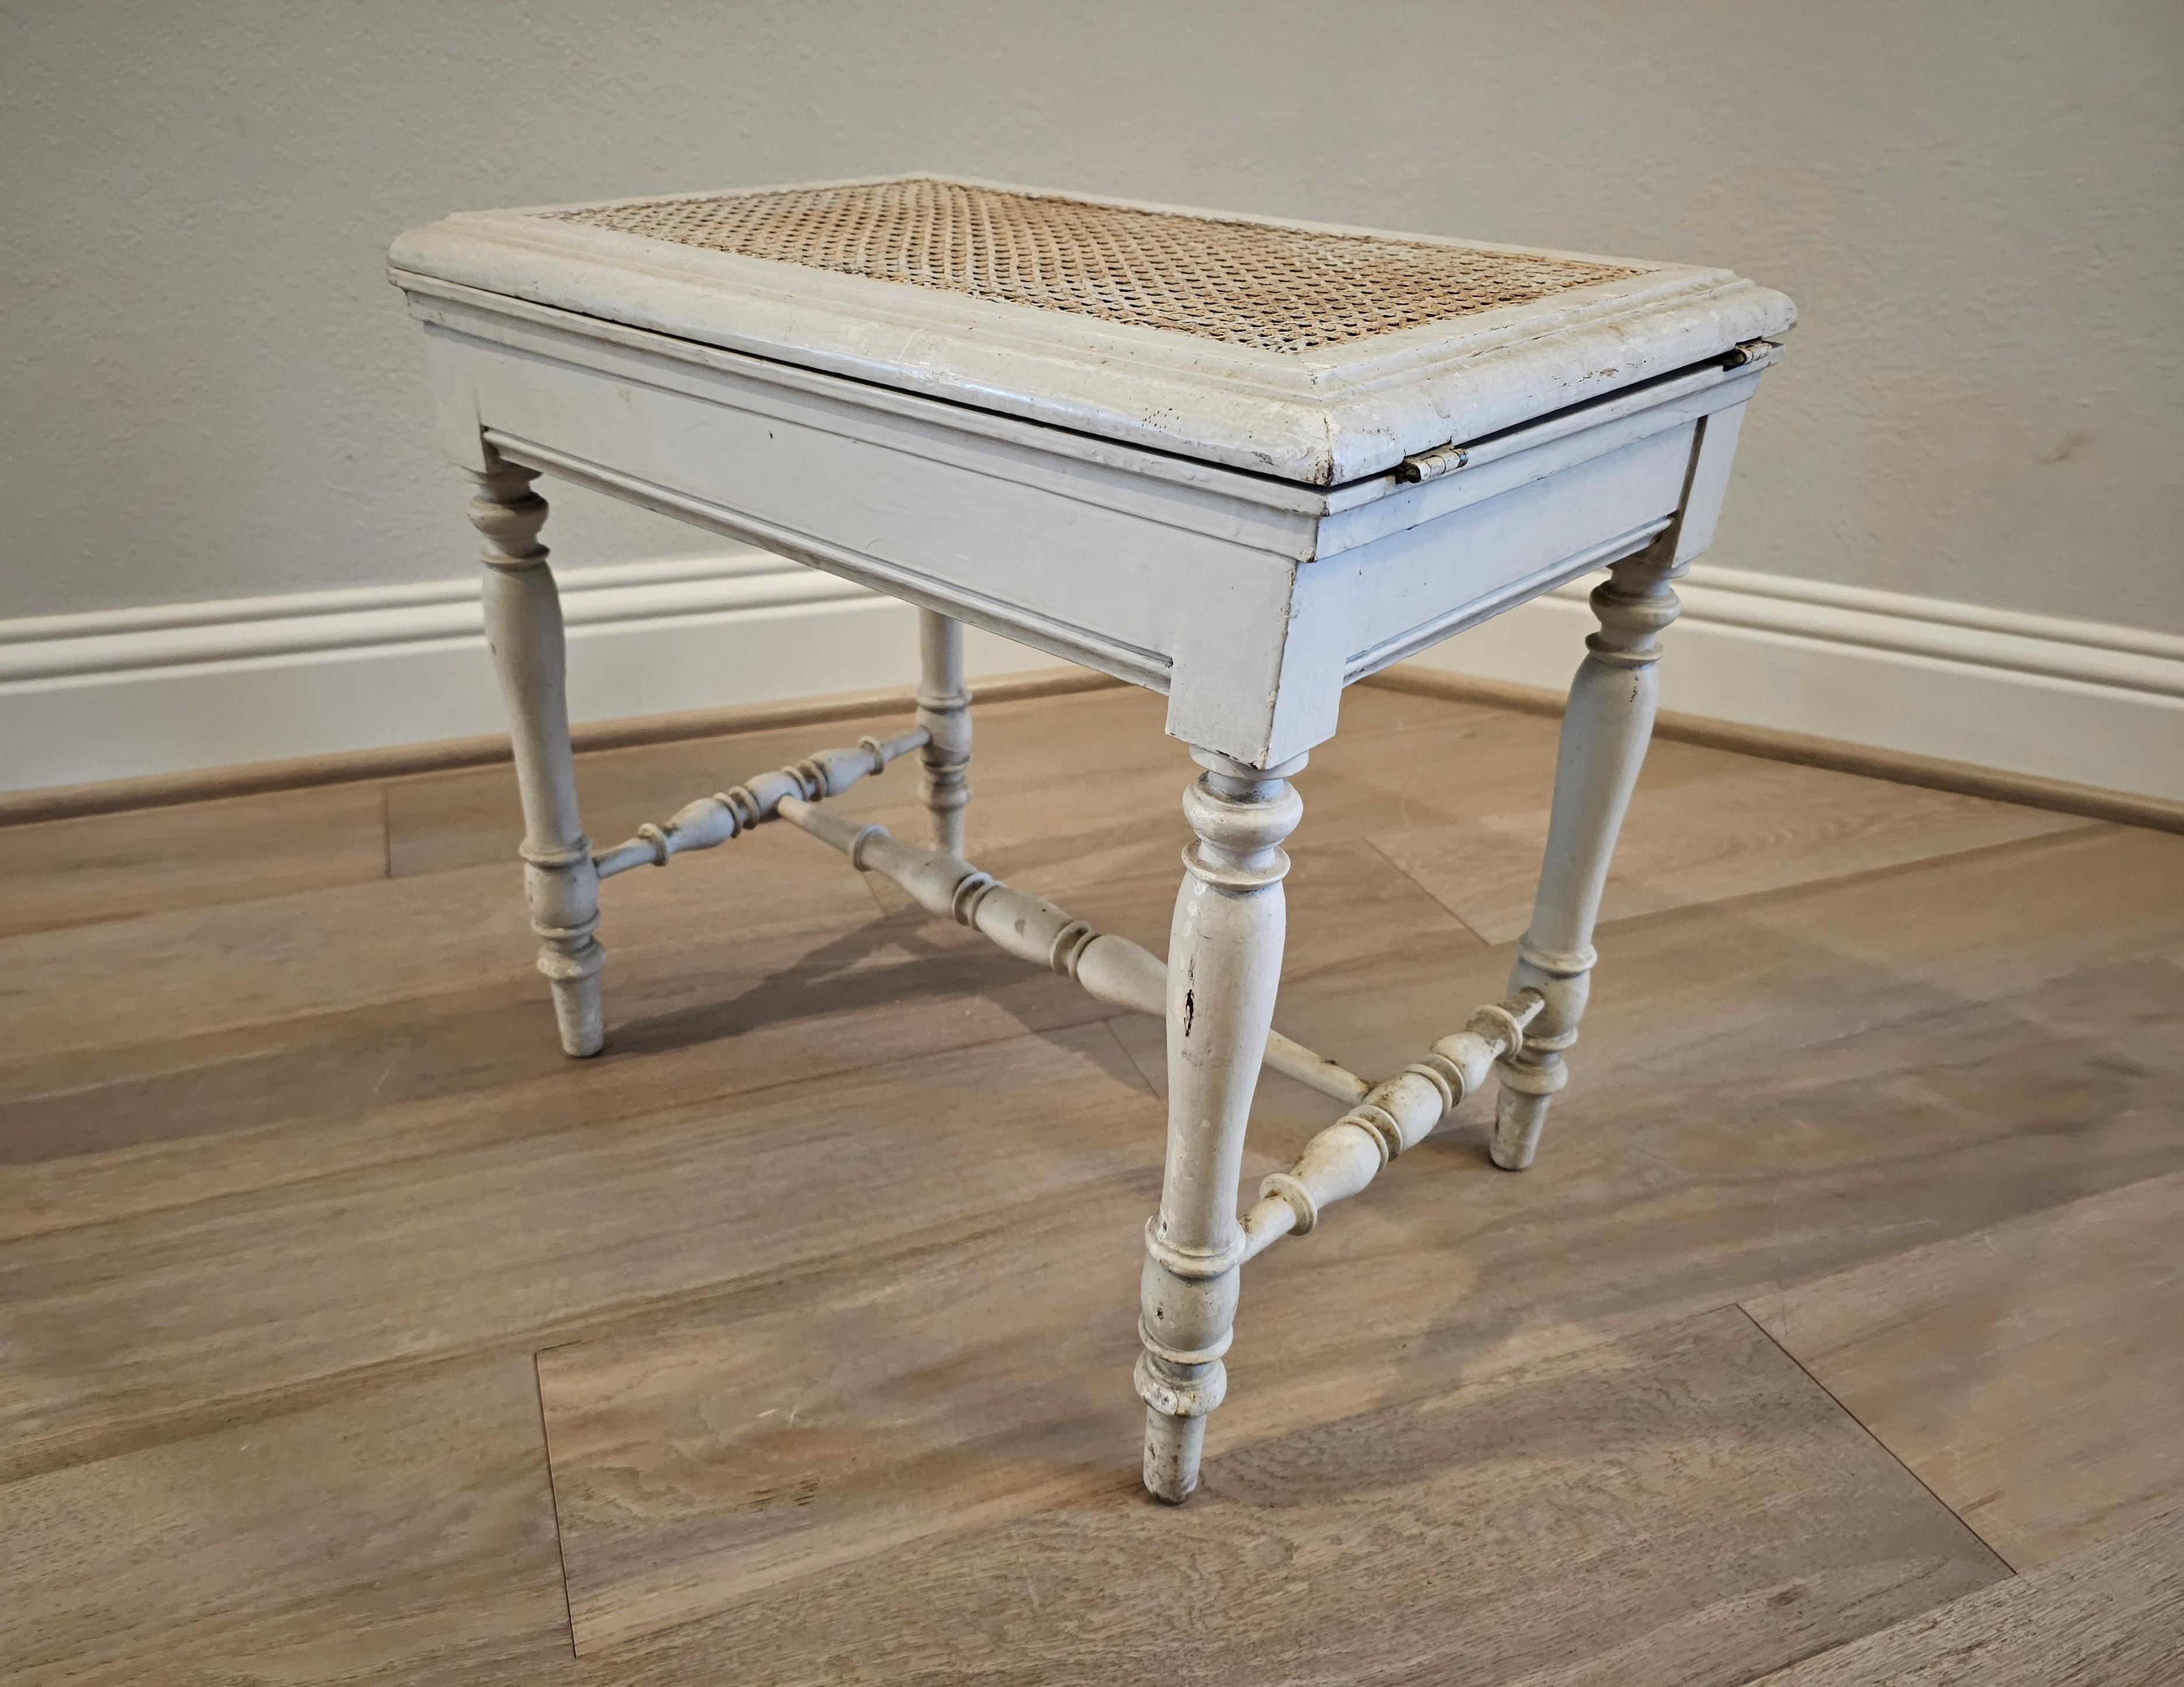 Antique French Provincial Louis XVI Painted Cane Bidet Stool  In Distressed Condition For Sale In Forney, TX